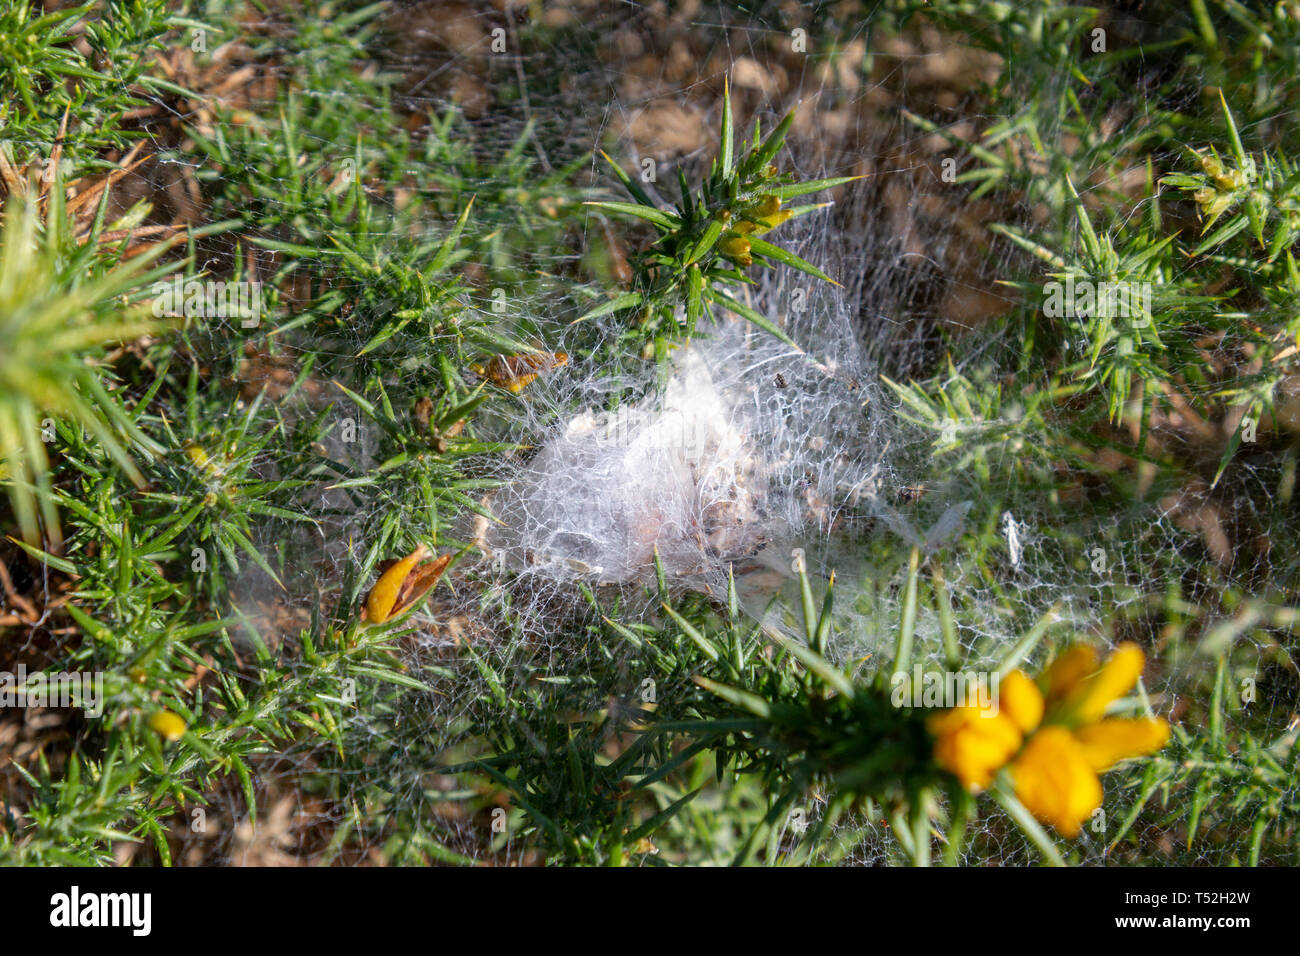 The web of a funnel web spider in a gorse bush in Newport, Pembrokeshire Coast National Park, Wales. Stock Photo